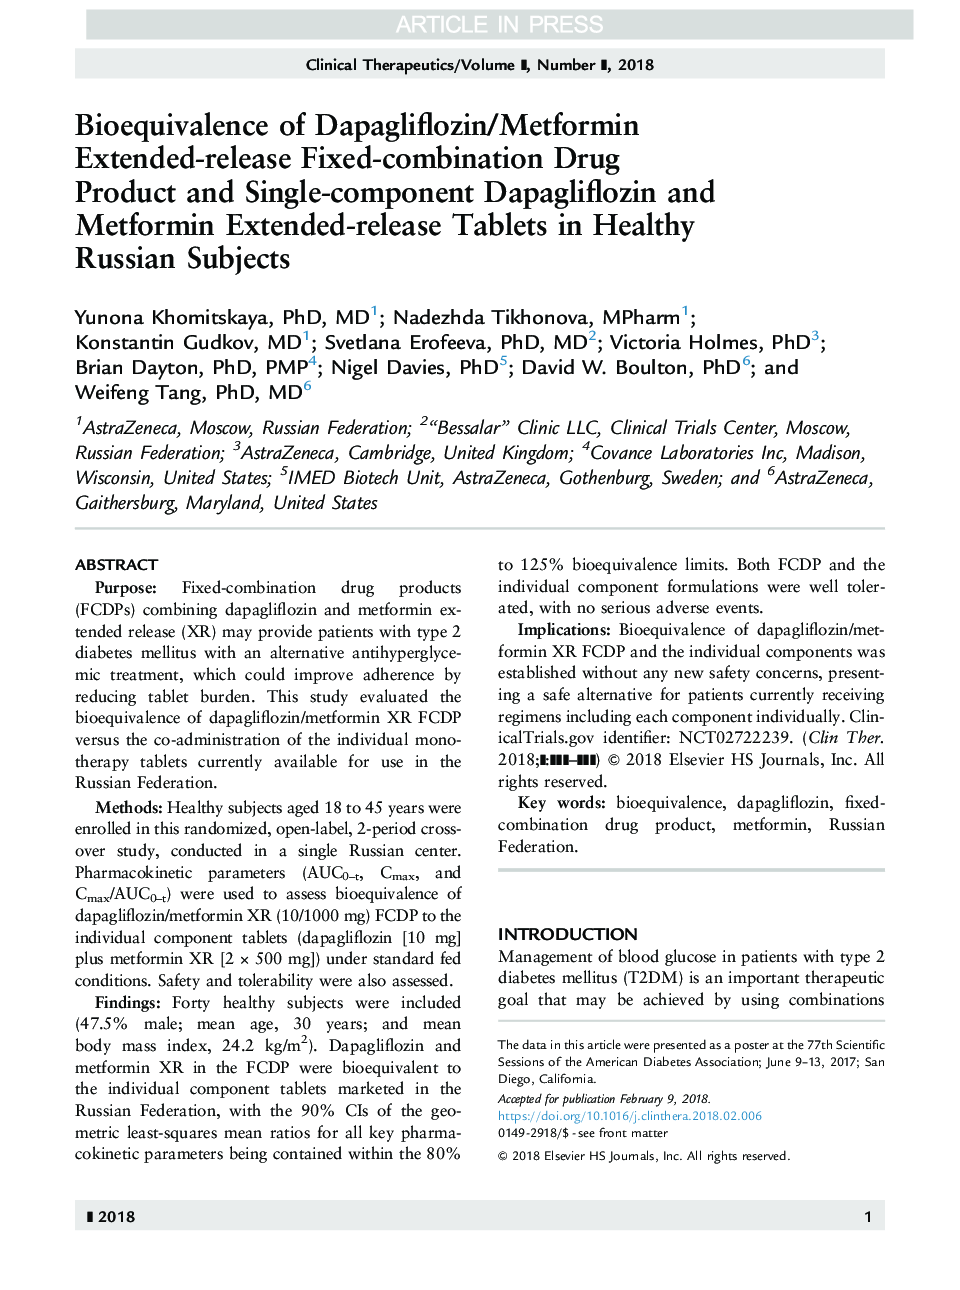 Bioequivalence of Dapagliflozin/Metformin Extended-release Fixed-combination Drug Product and Single-component Dapagliflozin and Metformin Extended-release Tablets in Healthy Russian Subjects